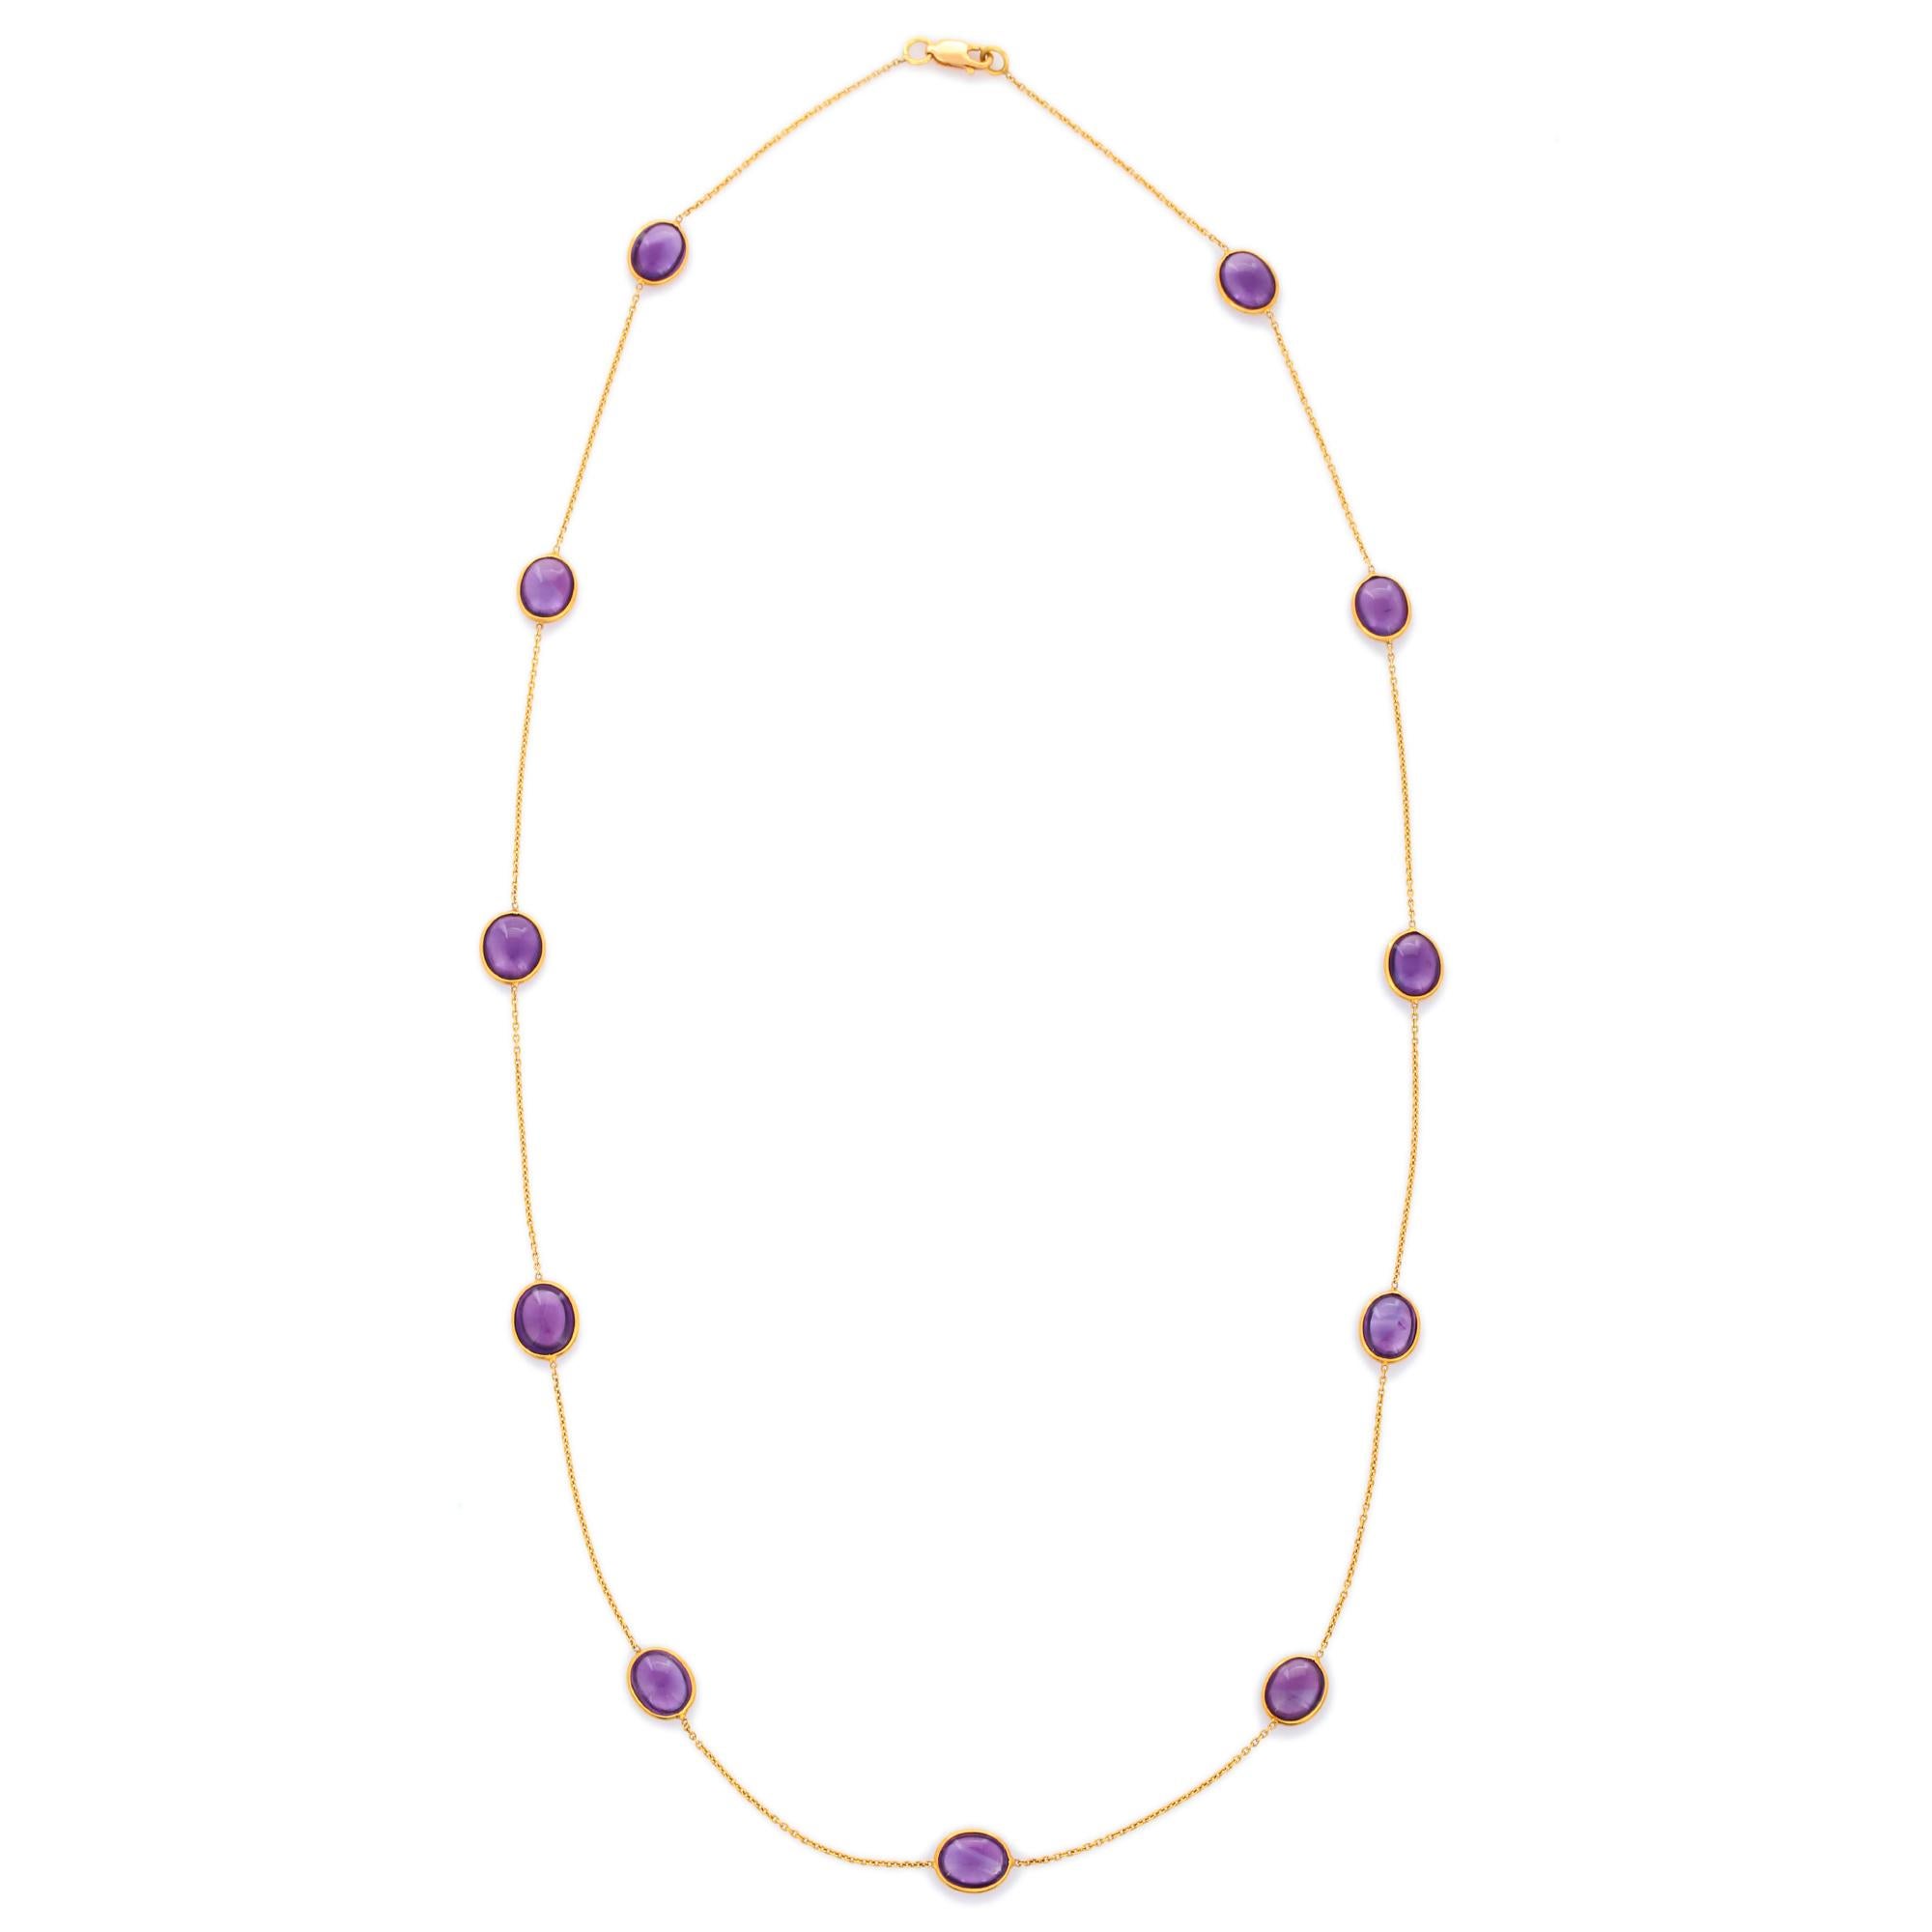 Women's Modern 25.5 Ct Oval Amethyst Chain Necklace Enhancer in 18K Yellow Gold For Sale